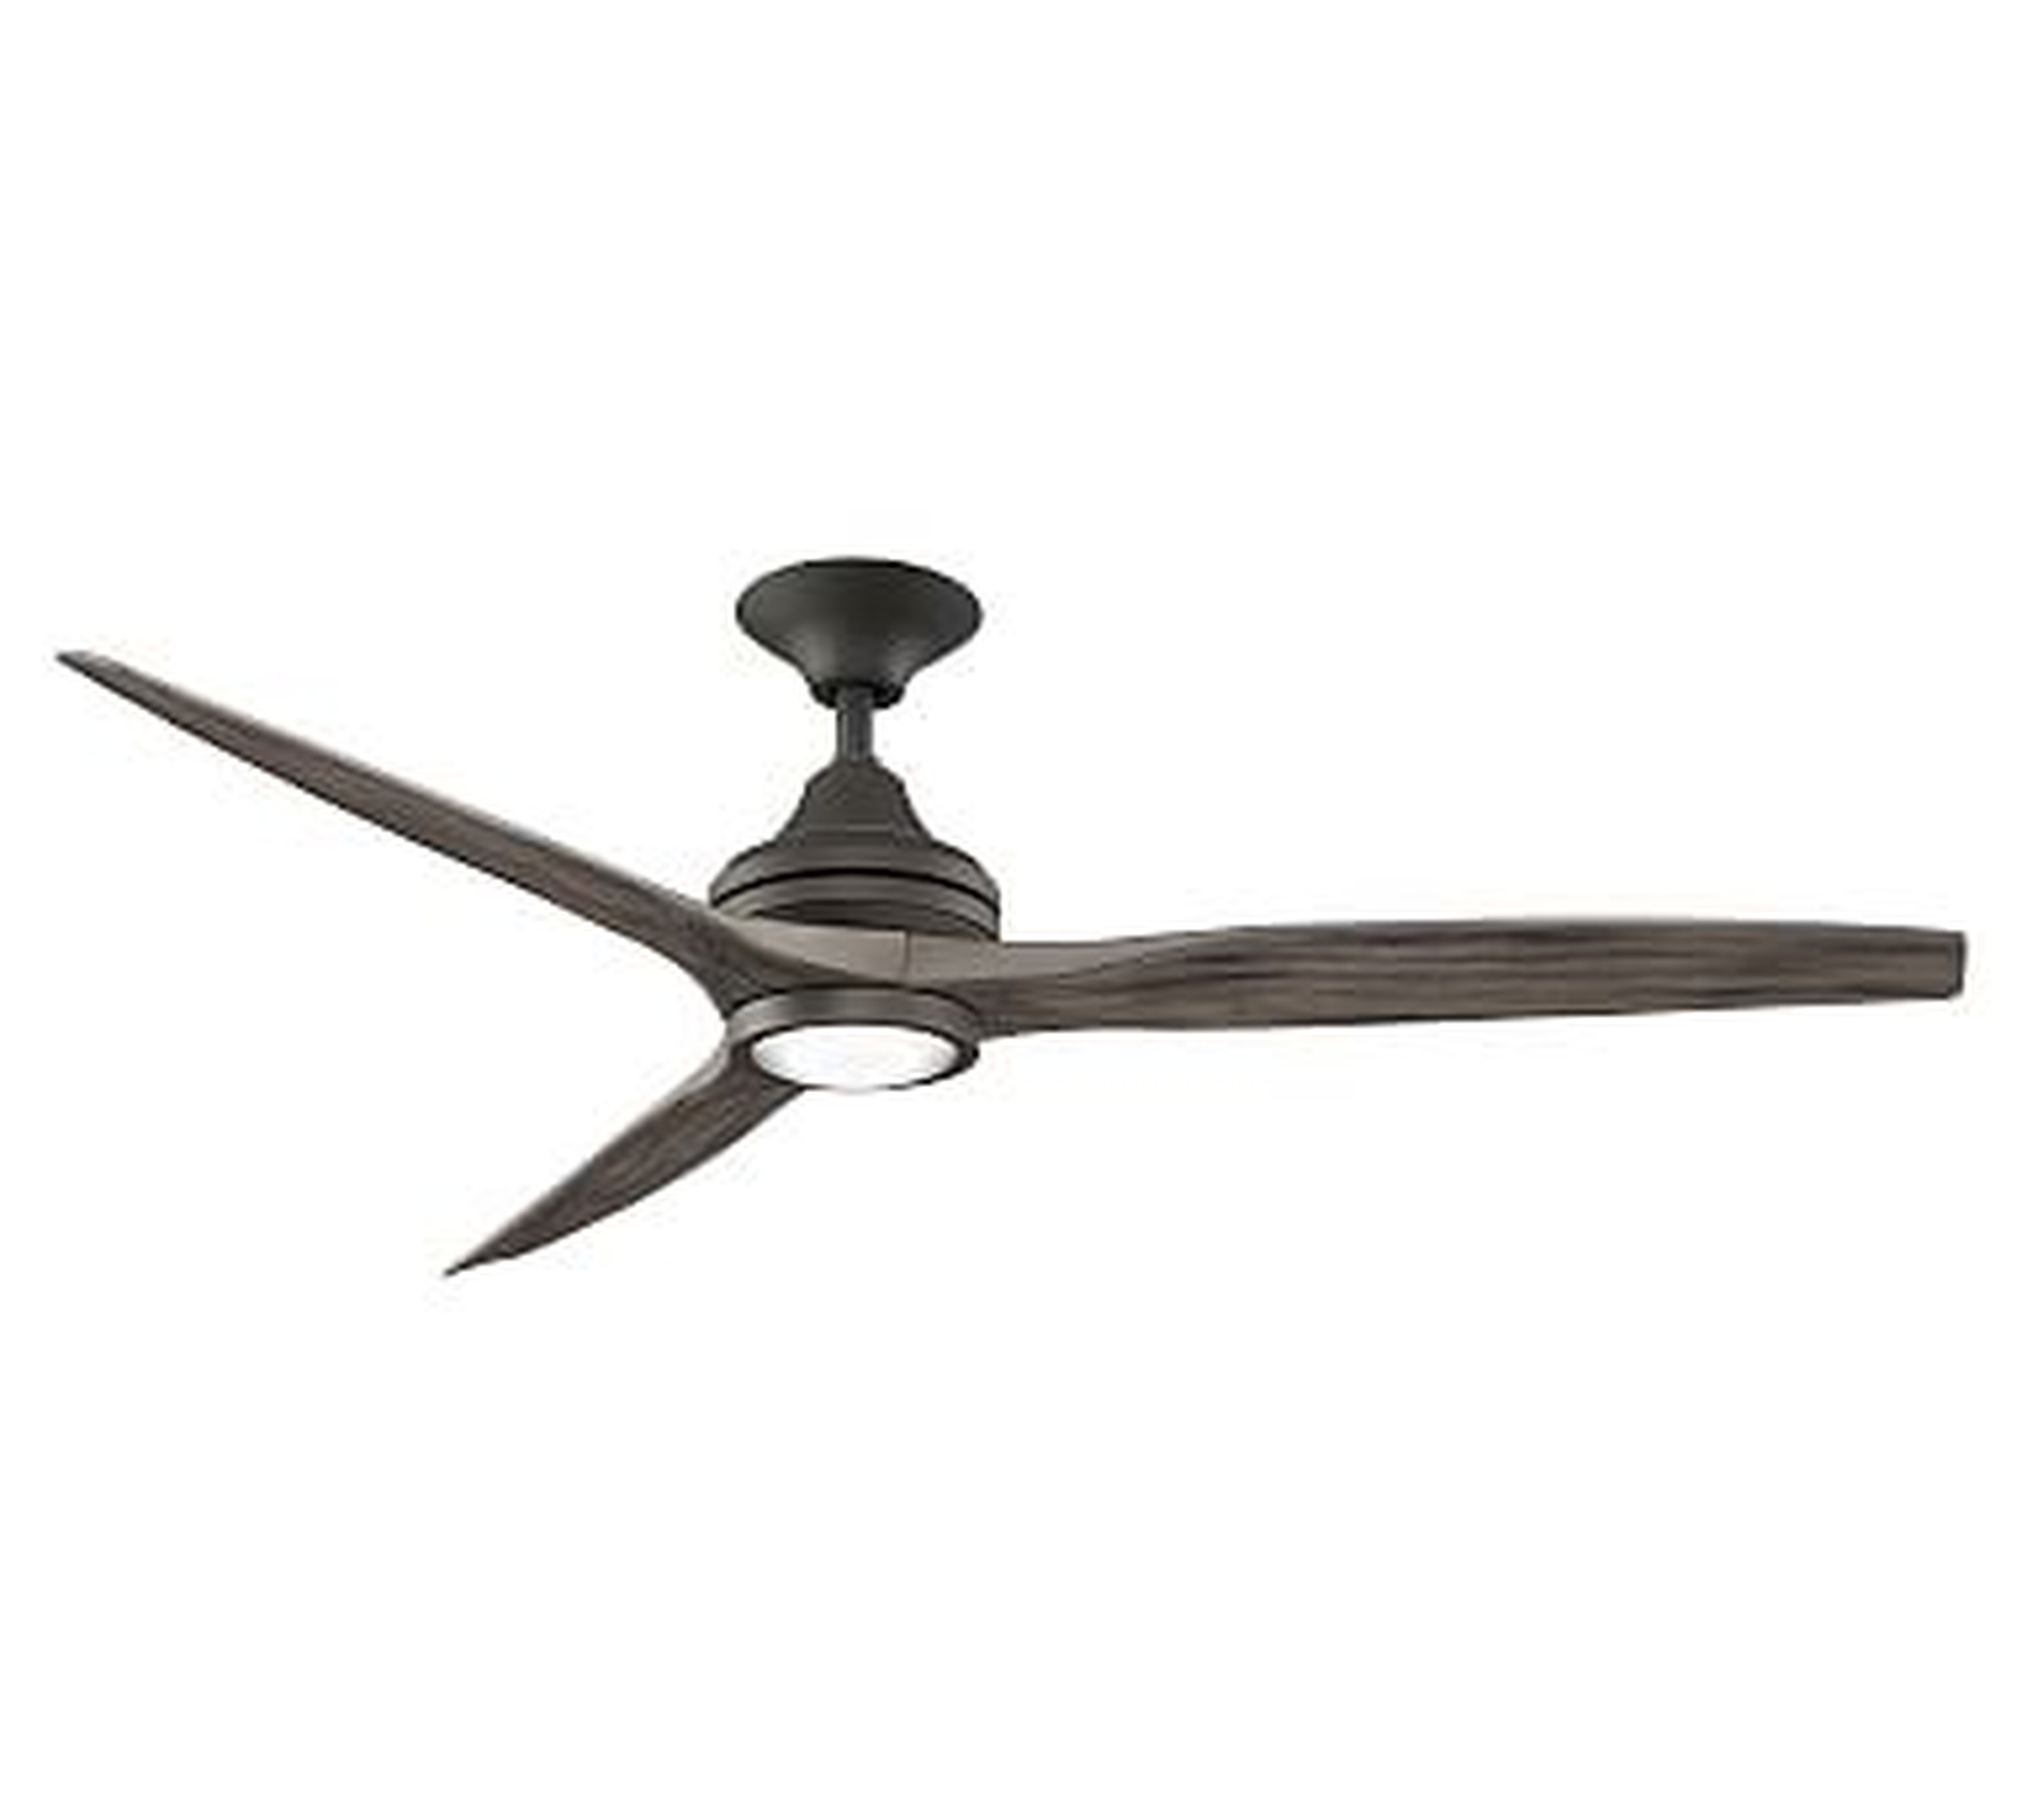 60" Spitfire Indoor/Outdoor Ceiling Fan with LED Kit, Matte Greige Motor with Weathered Wood Blades - Pottery Barn